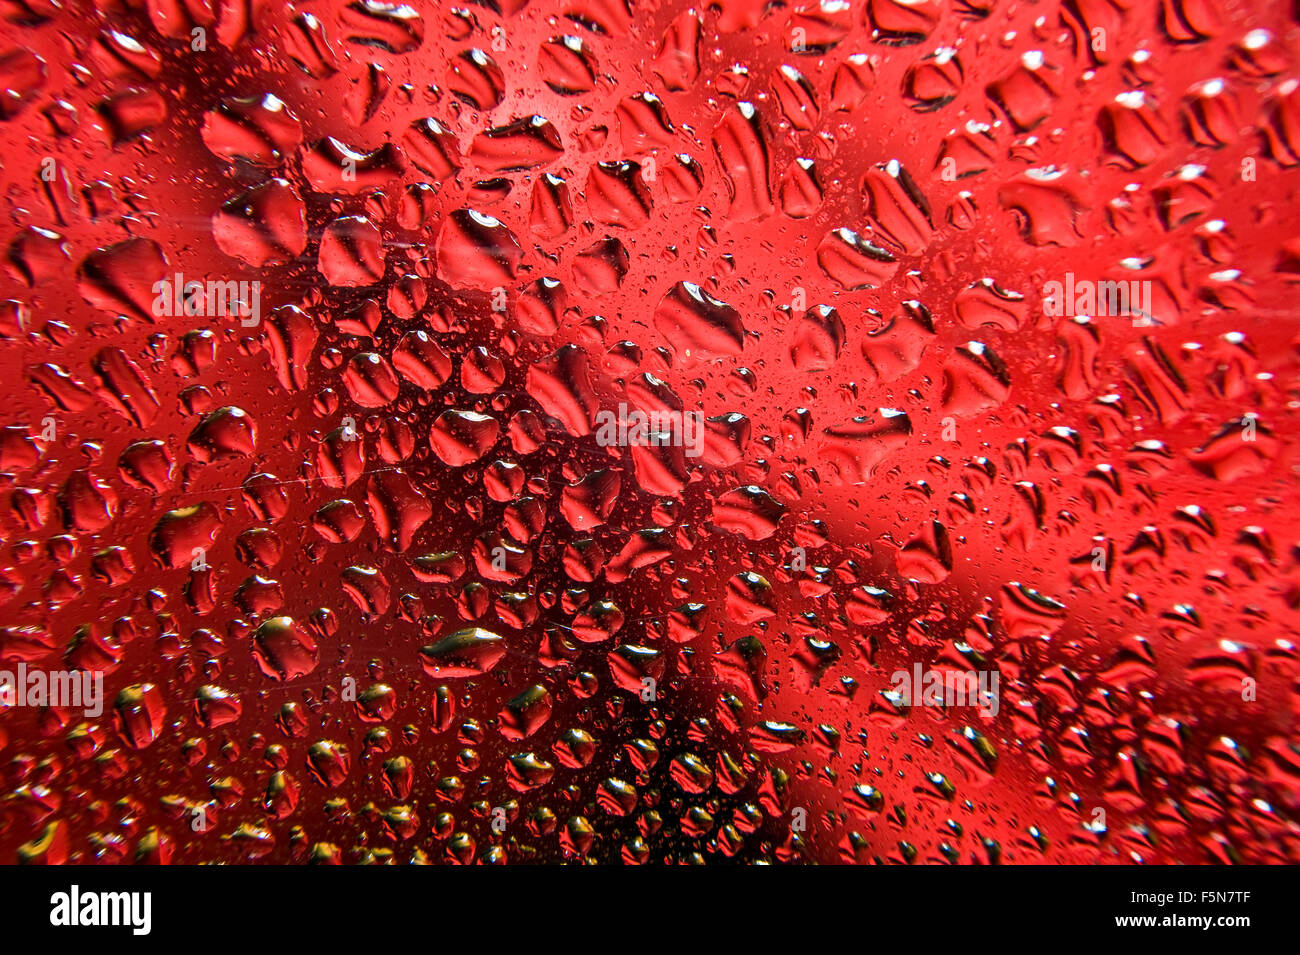 Abstract, red and black color background with water drops. Stock Photo